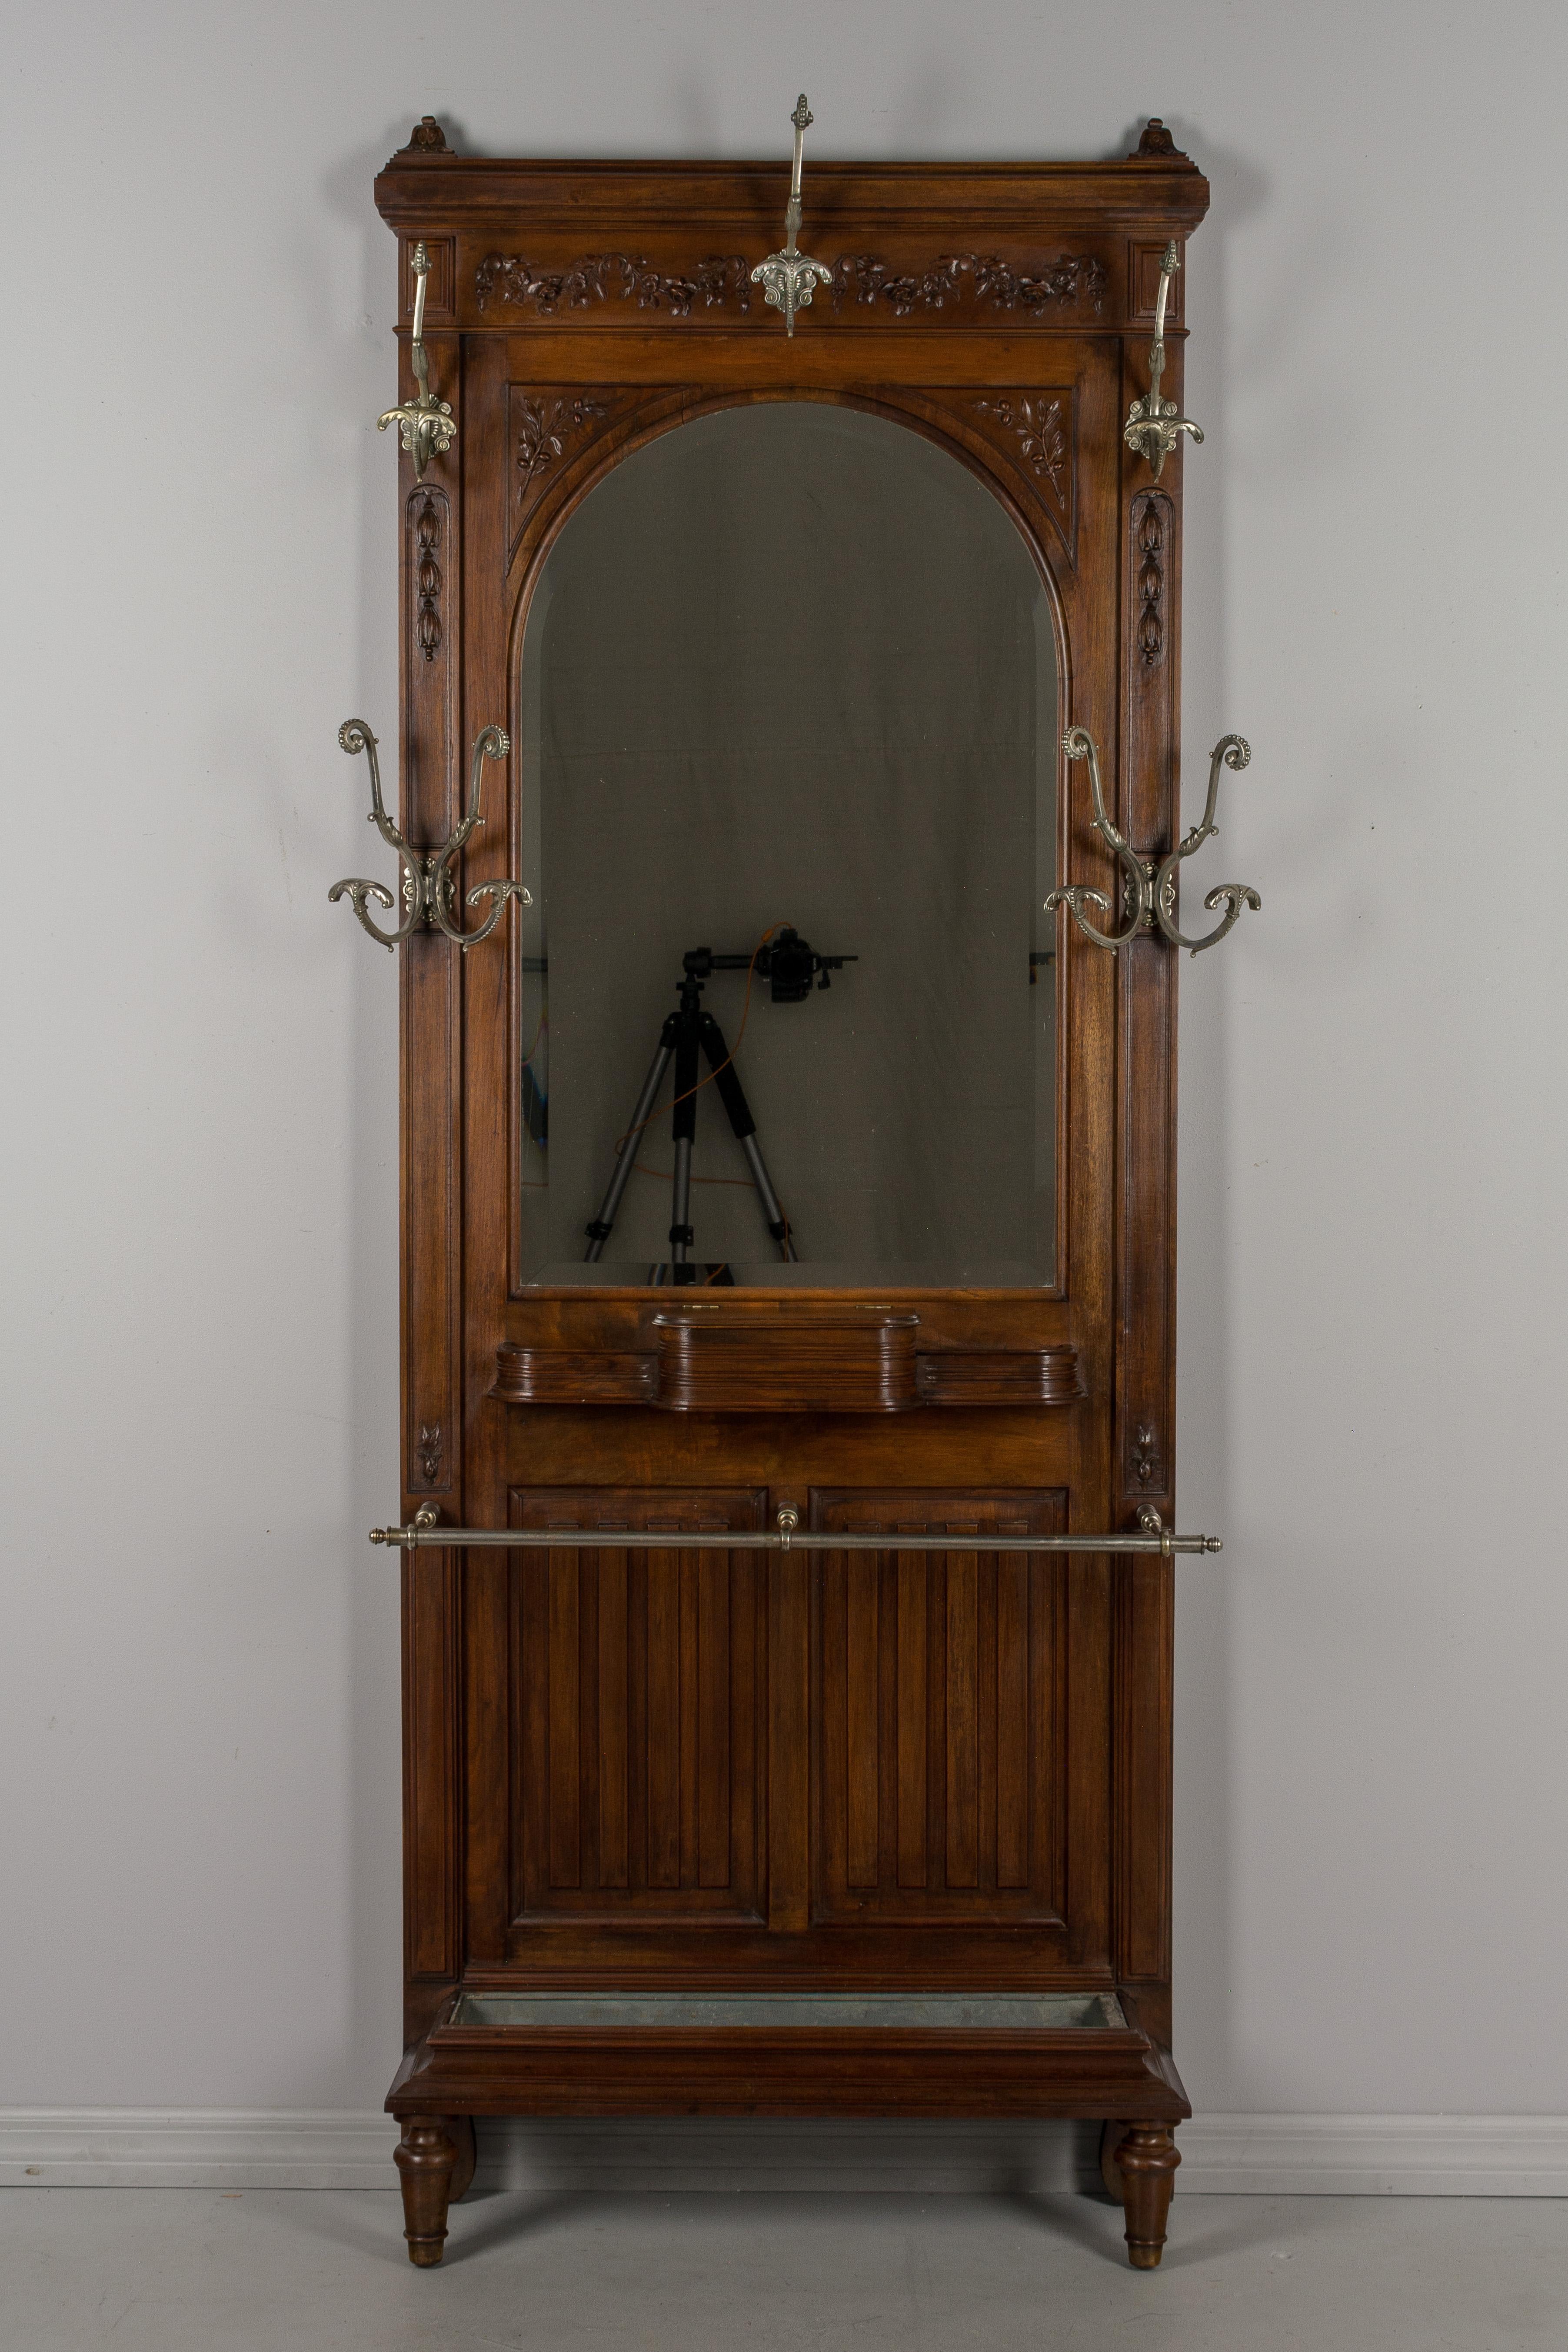 A Louis XVI style French entryway hall tree, or coat rack, with large arched beveled mirror. Made of solid walnut decorated with hand carved floral swags and olive branches. Beautifully detailed nickel plated brass coat hooks. Hinged box for gloves